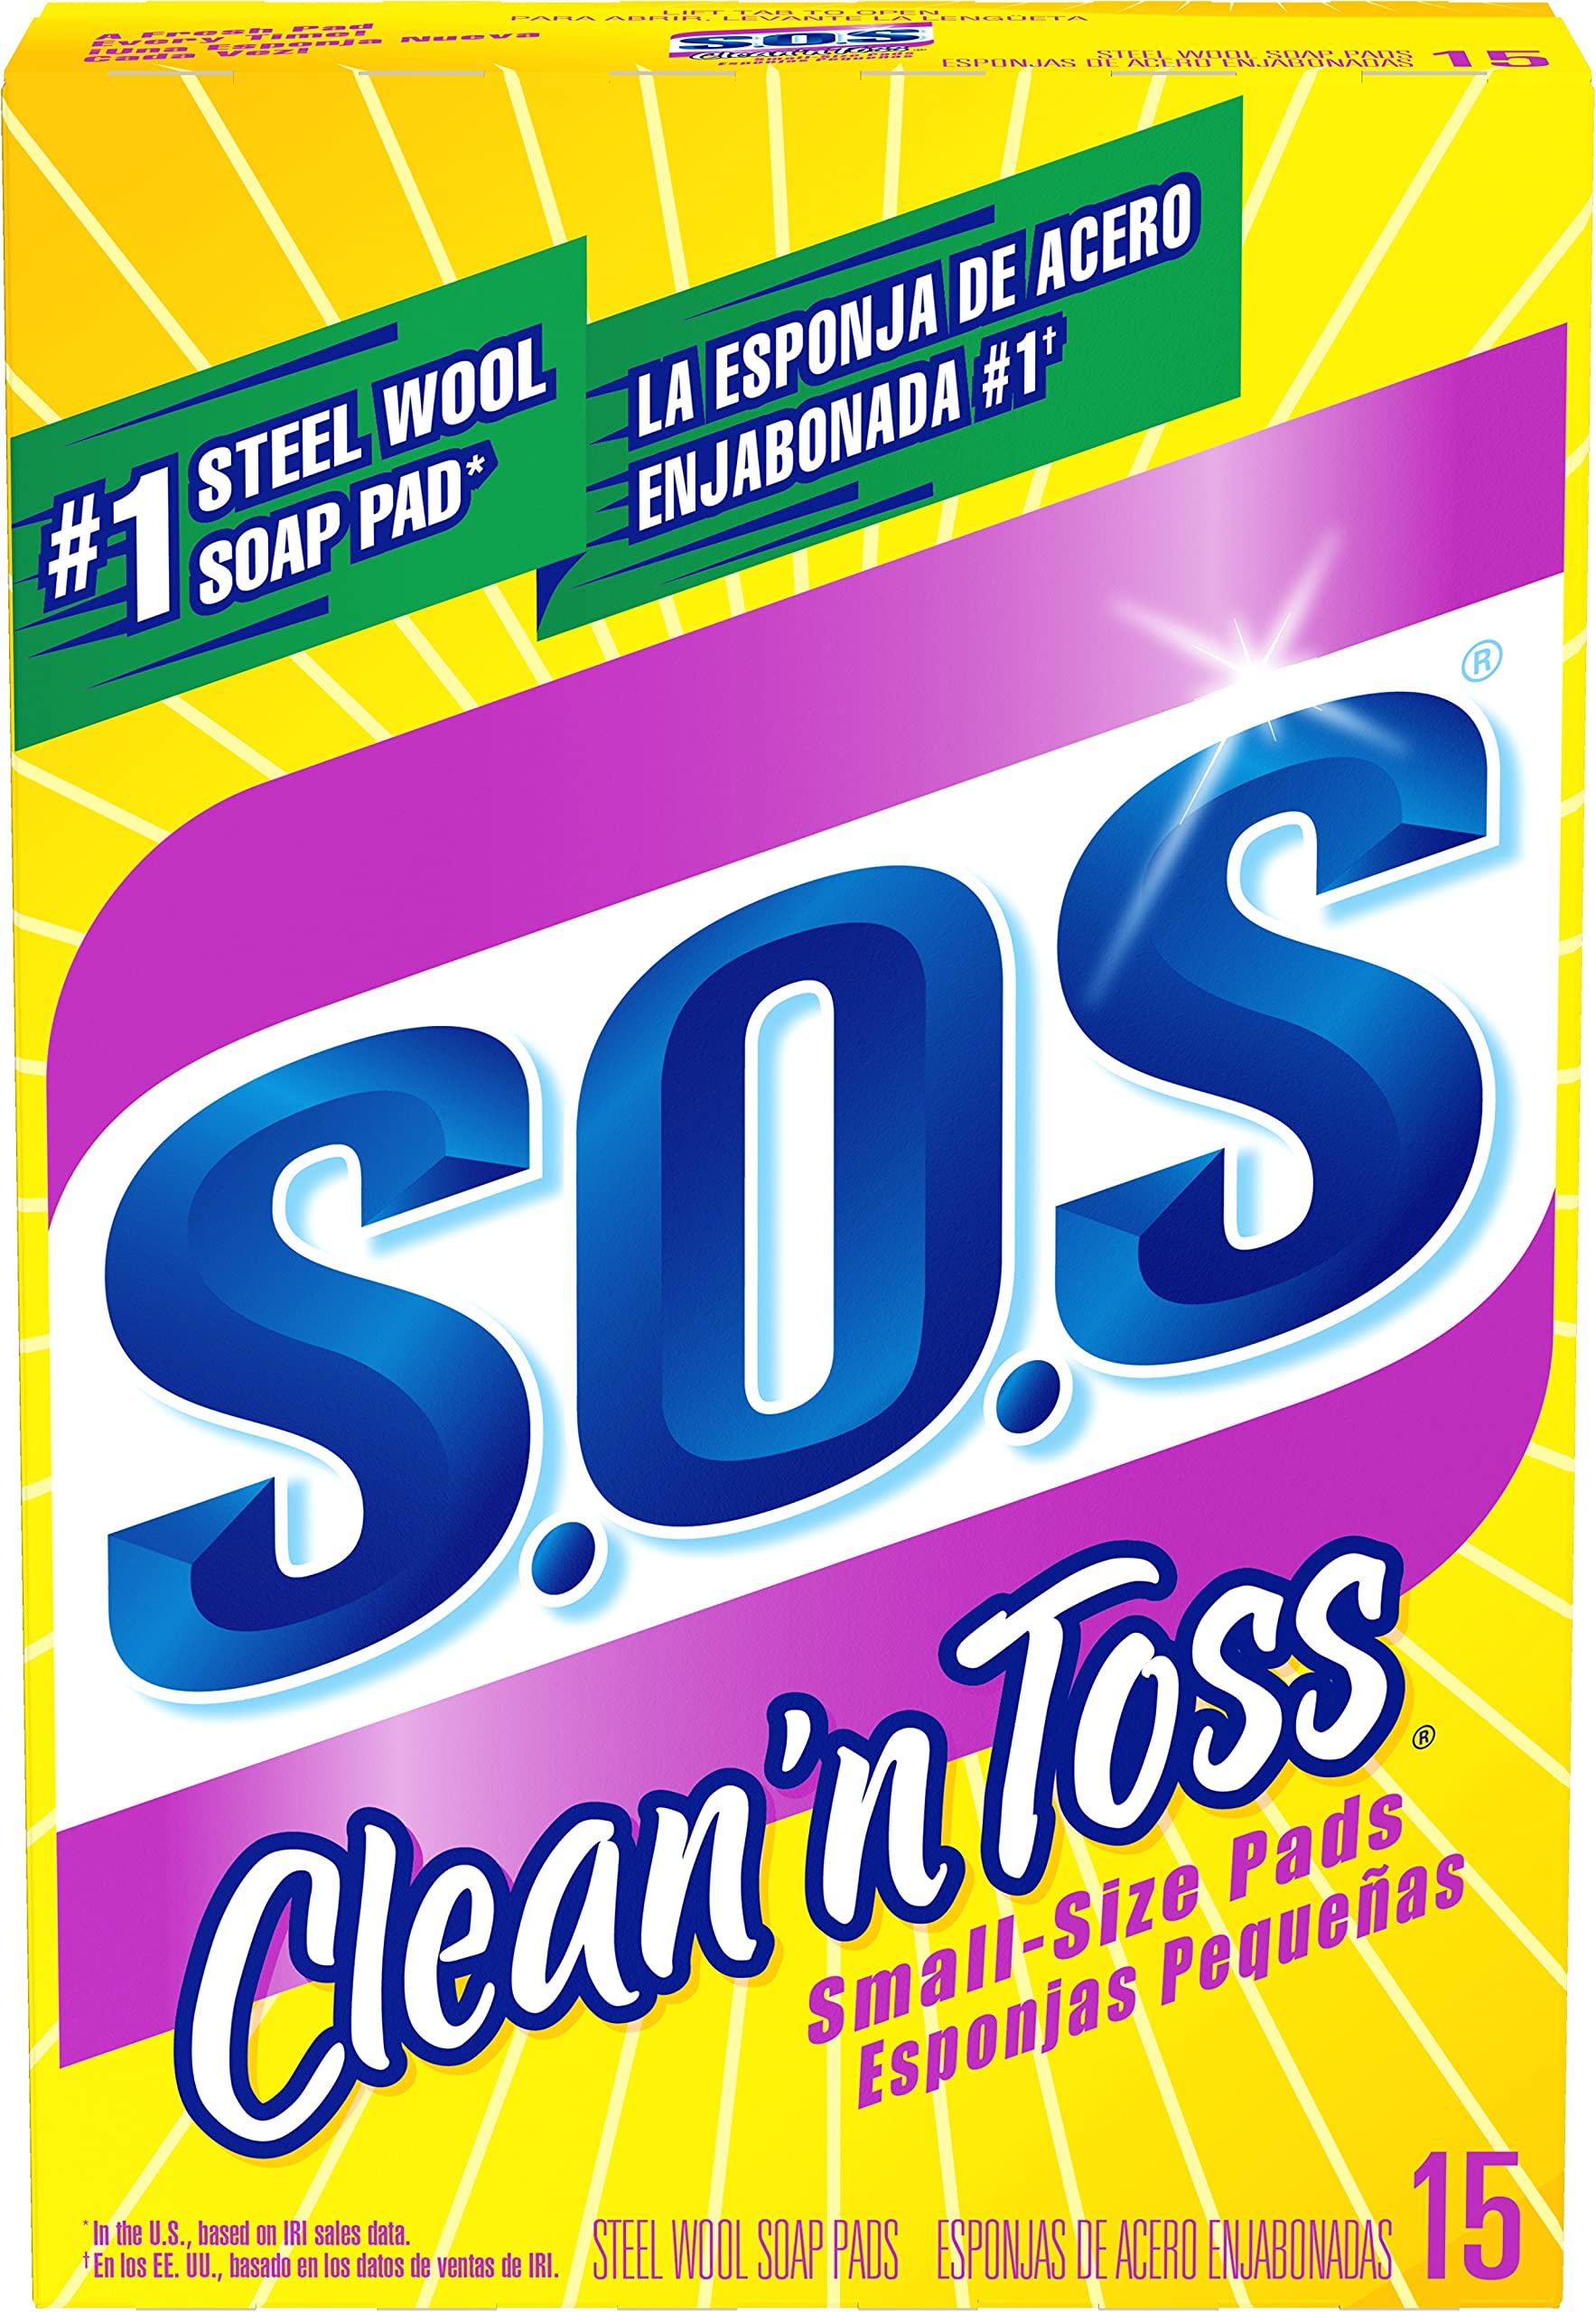 S.O.S Clean n' Toss Steel Wool Soap Pads, Home Cleaning Pads, Reusable Soap Scrubbers, Grease Cleaner, Outdoor, Bathroom or Kitchen Cleaning, Small Size Pads, 15 Count